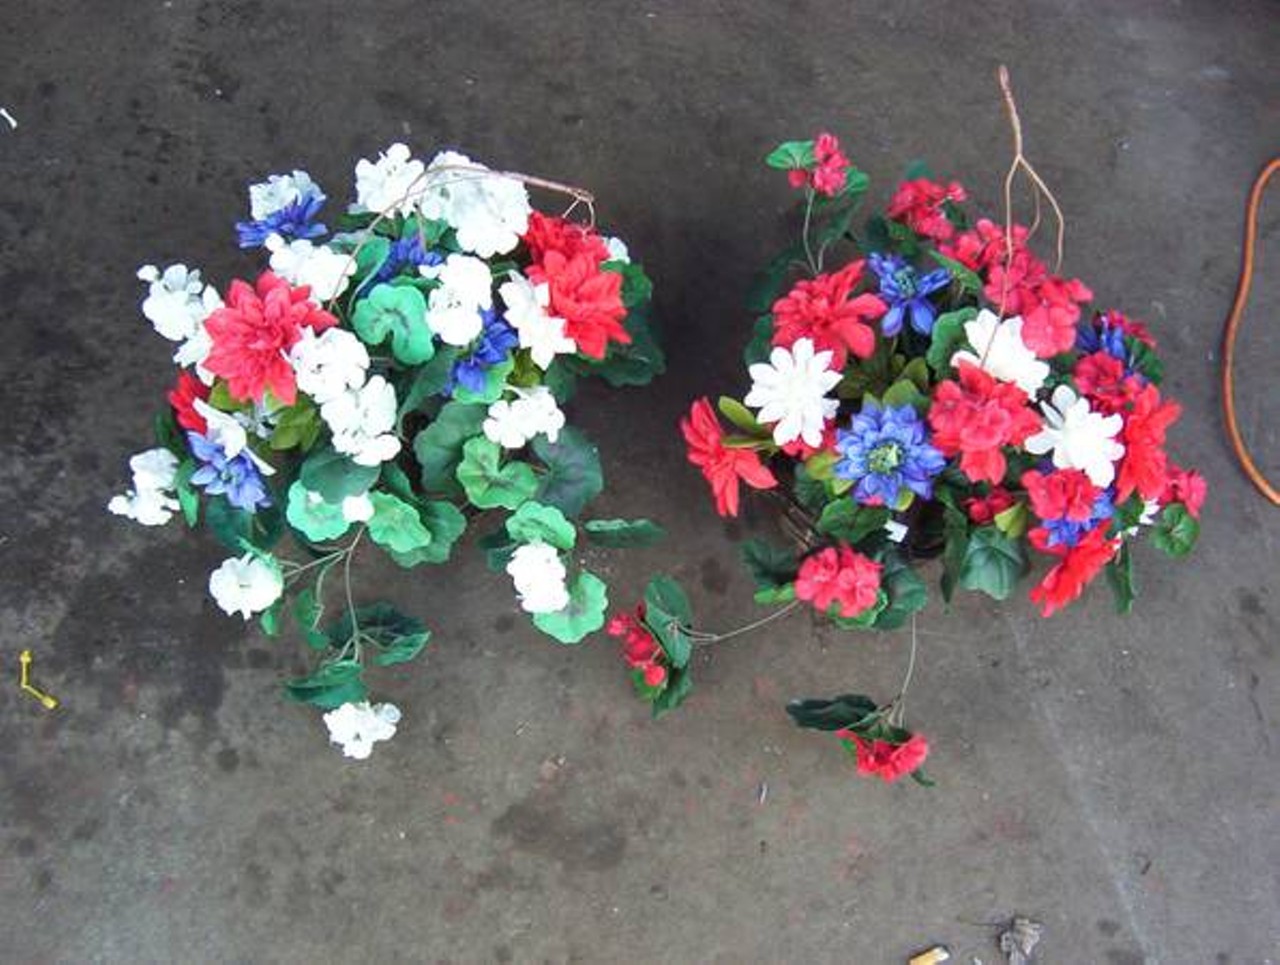 Plastic Flowers
Cause why buy the real thing? $5 each.